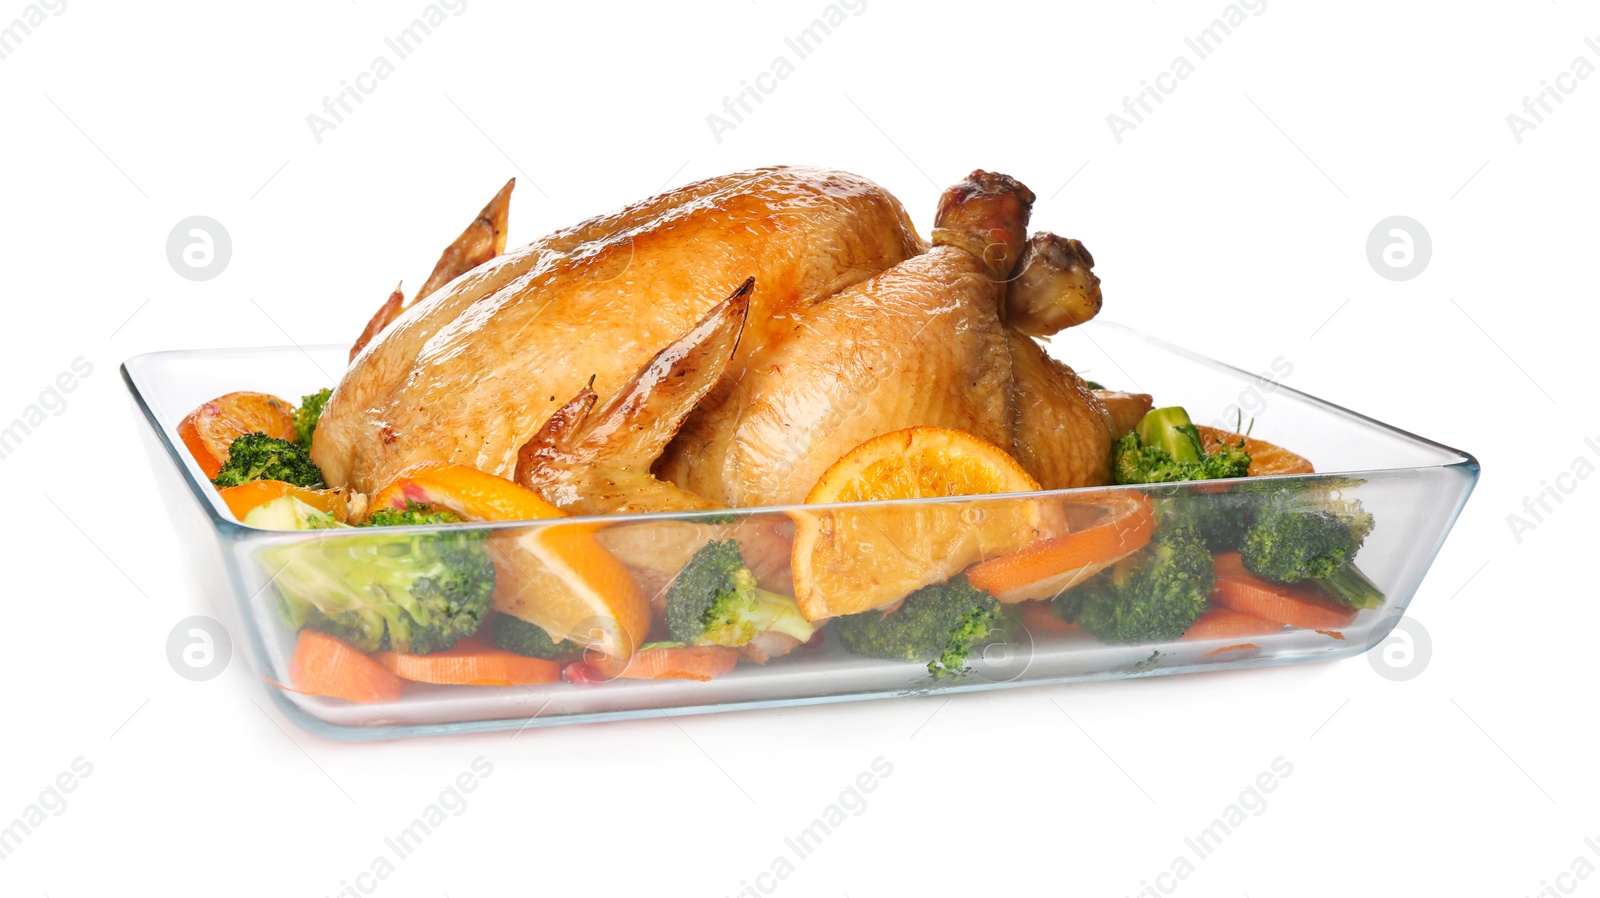 Photo of Roasted chicken with oranges and vegetables isolated on white